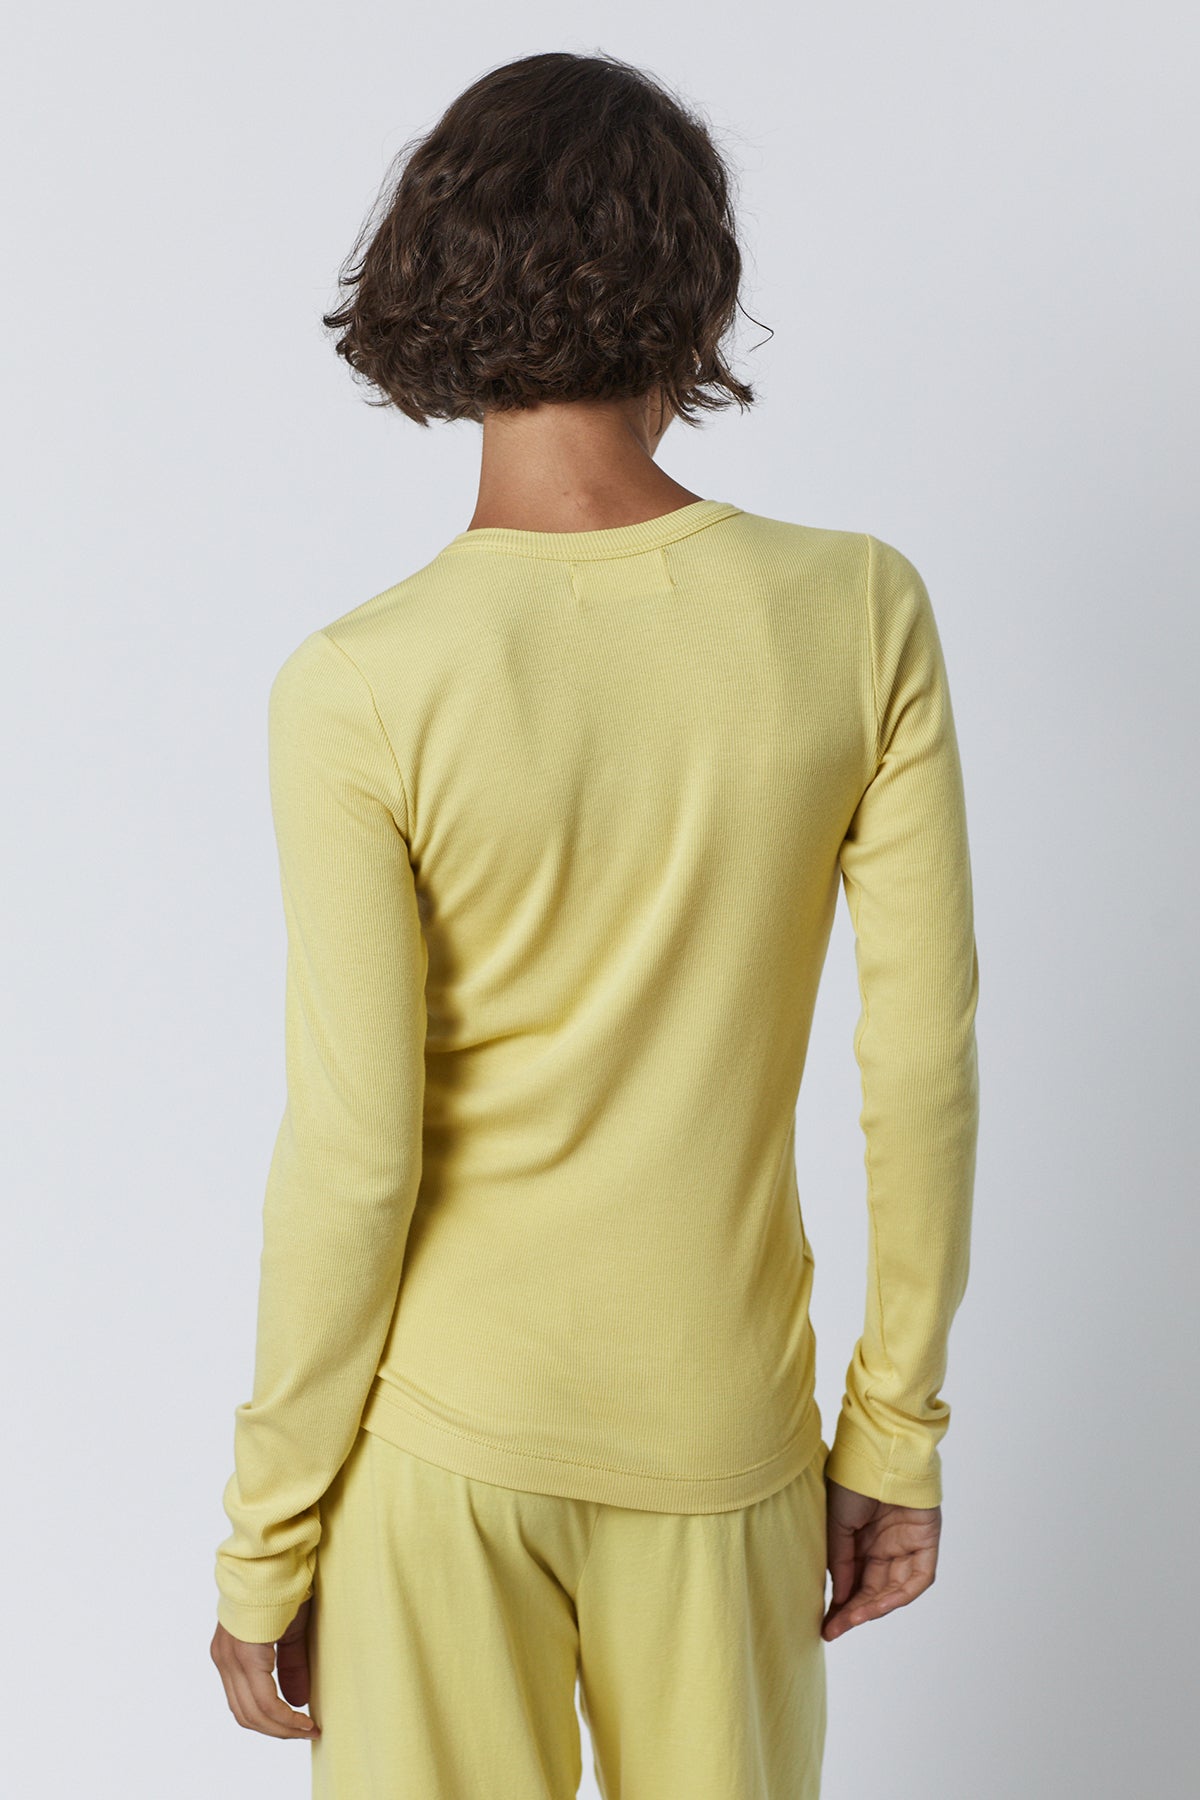 Camino Tee in soft lemon yellow with Pismo pant back-26002801197249